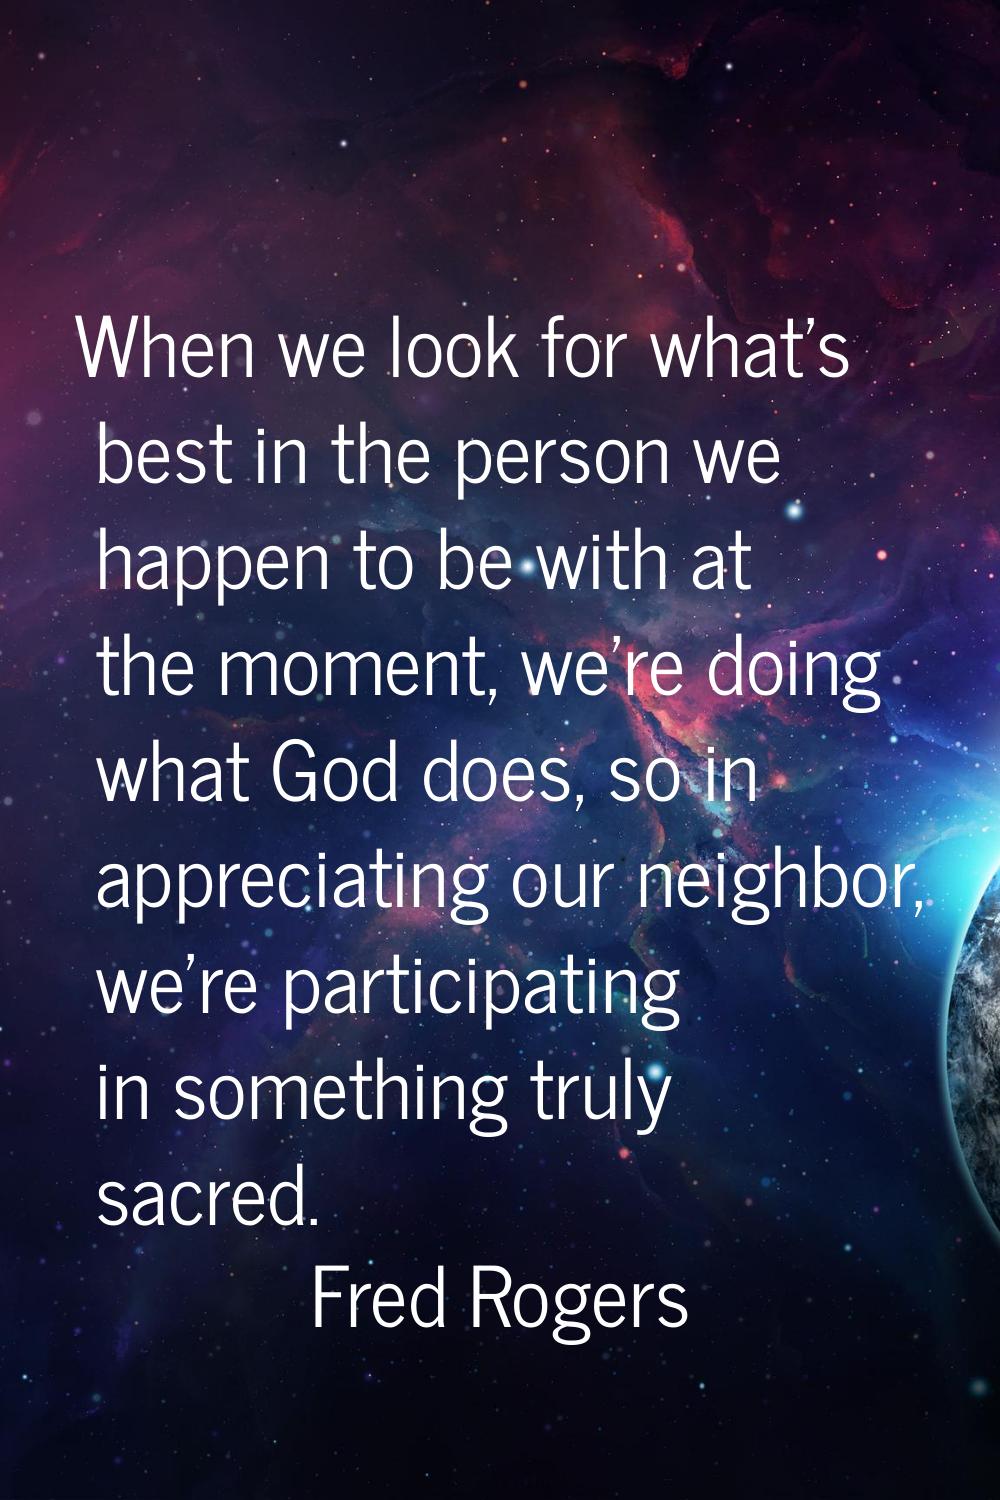 When we look for what's best in the person we happen to be with at the moment, we're doing what God